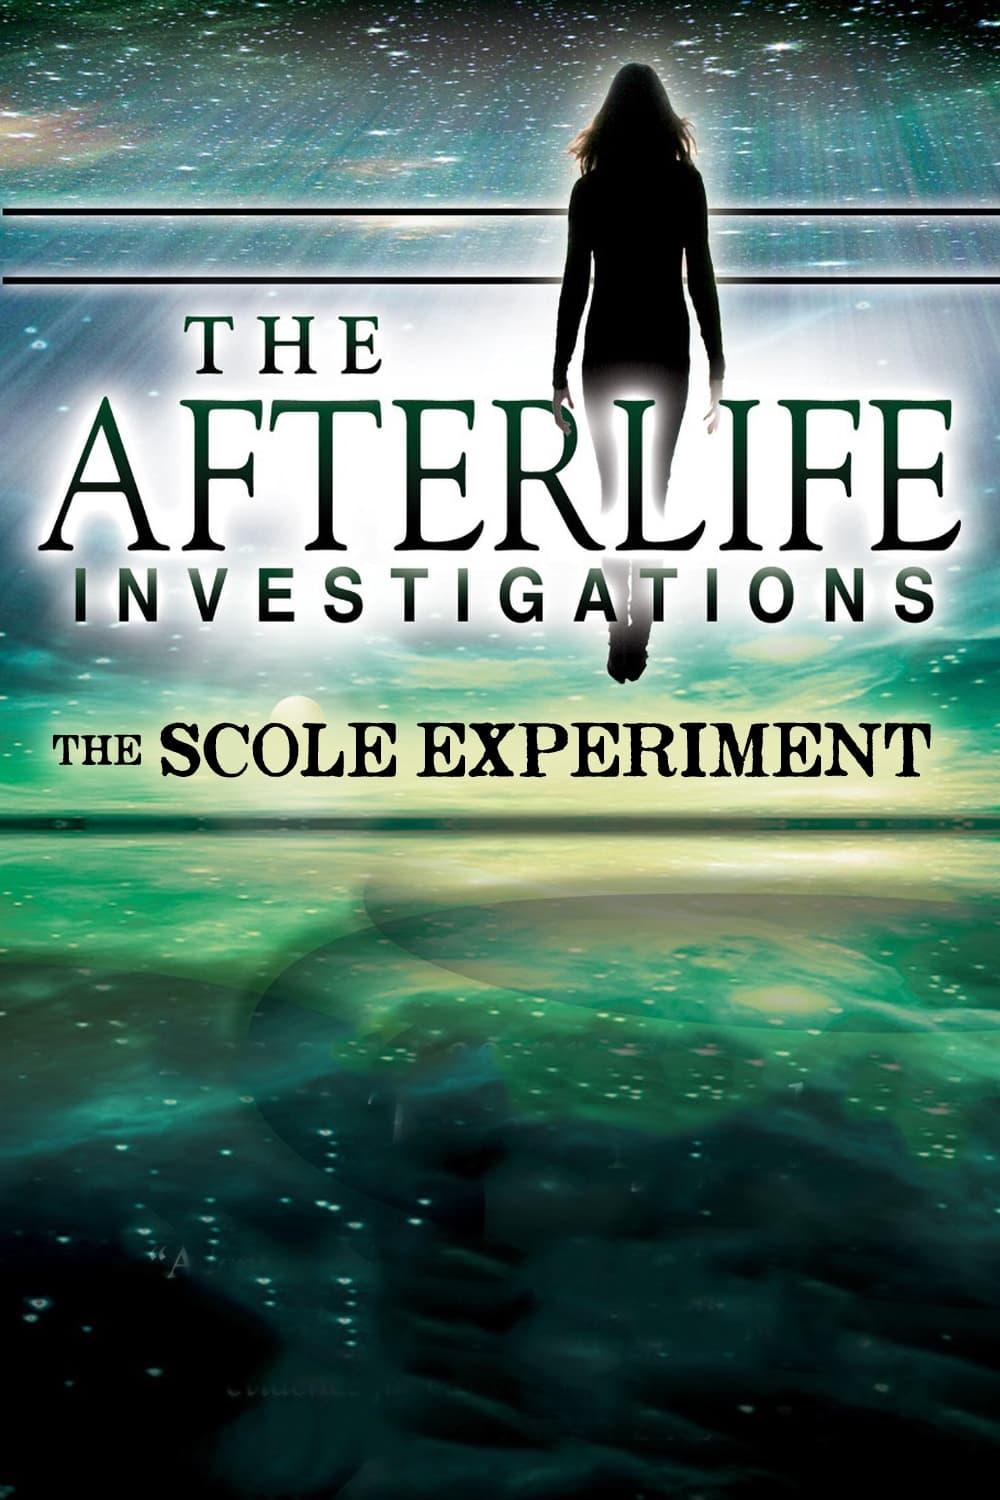 The Afterlife Investigations: The Scole Experiments poster